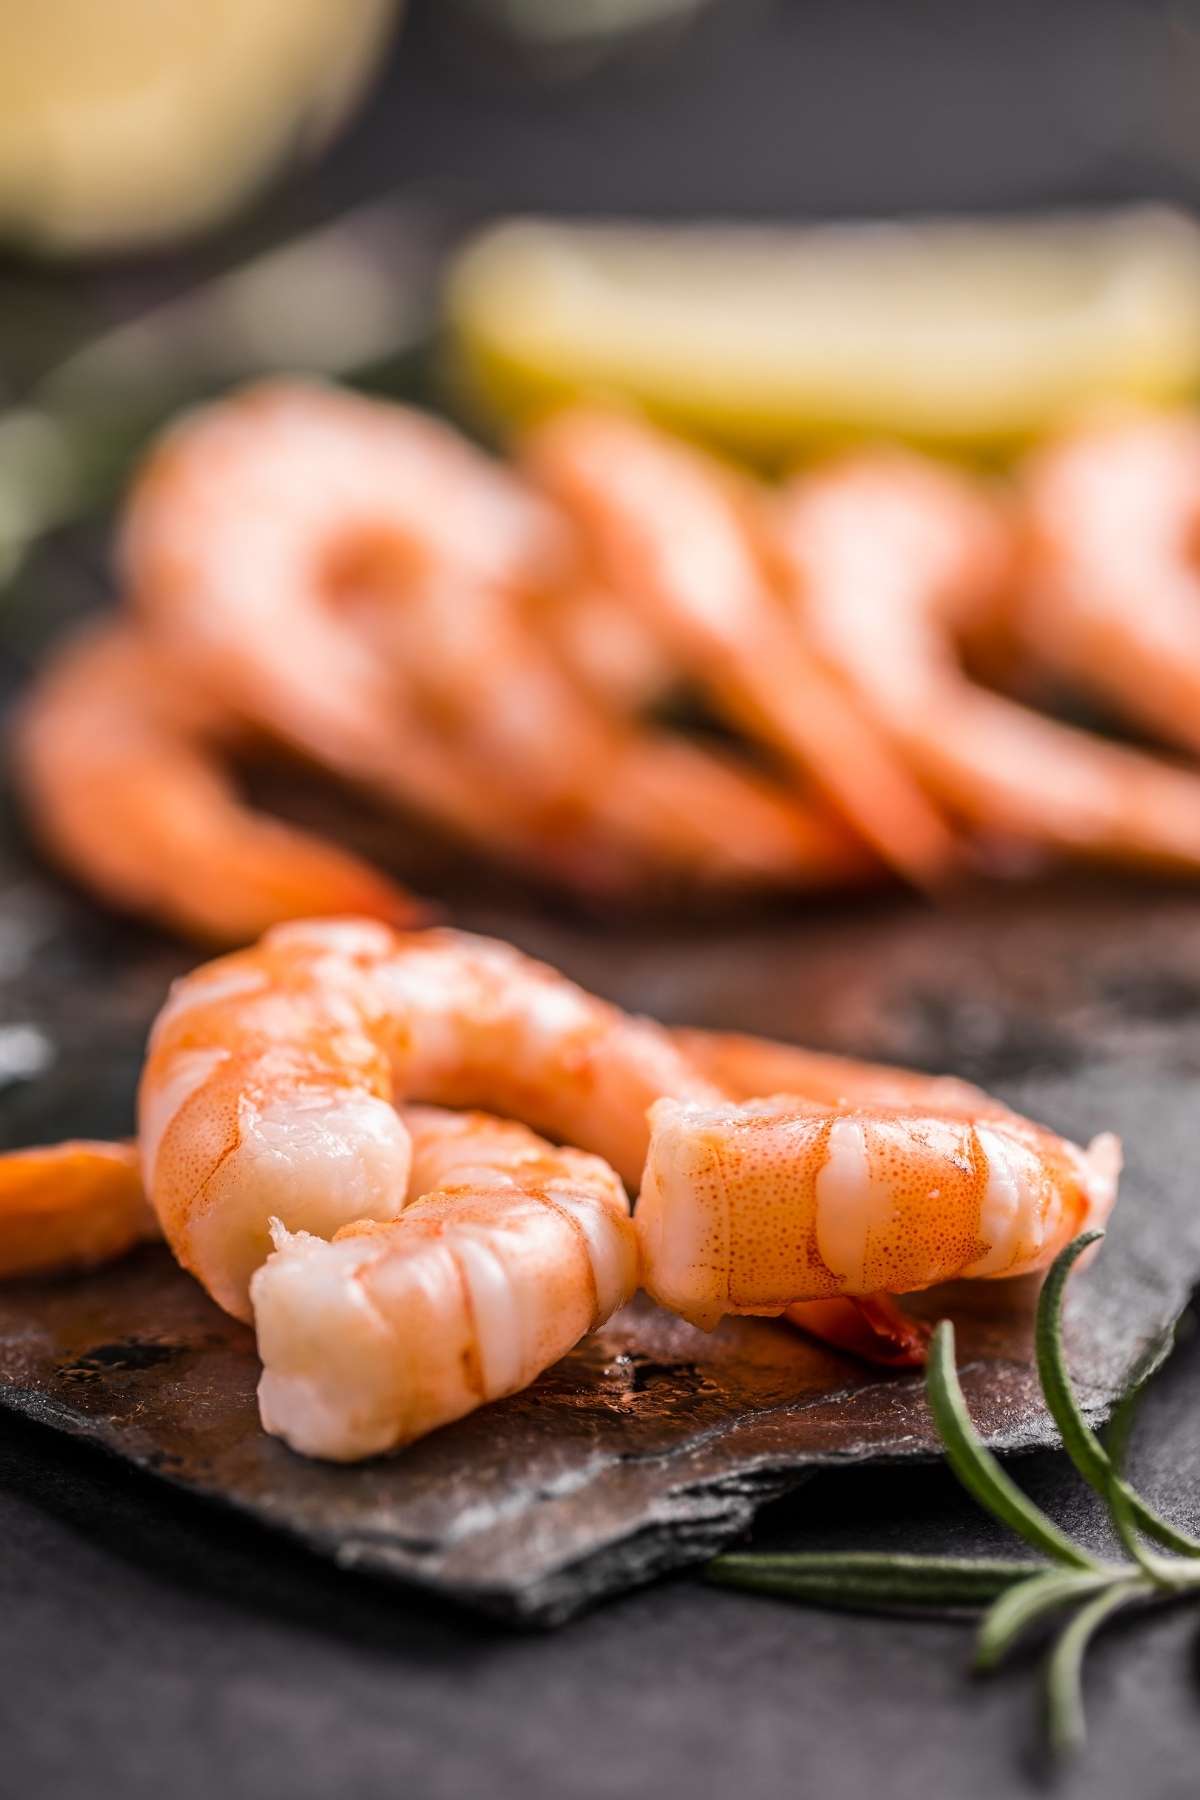 Shrimp is a versatile type of shellfish that can be enjoyed in many ways. It’s delicious in salads, stir fries, soups, and more. If you have cooked shrimp in your fridge, you want to ensure that it’s properly stored to keep it fresh. In this post, we’ll share some guidelines on how to safely store cooked shrimp in the fridge.